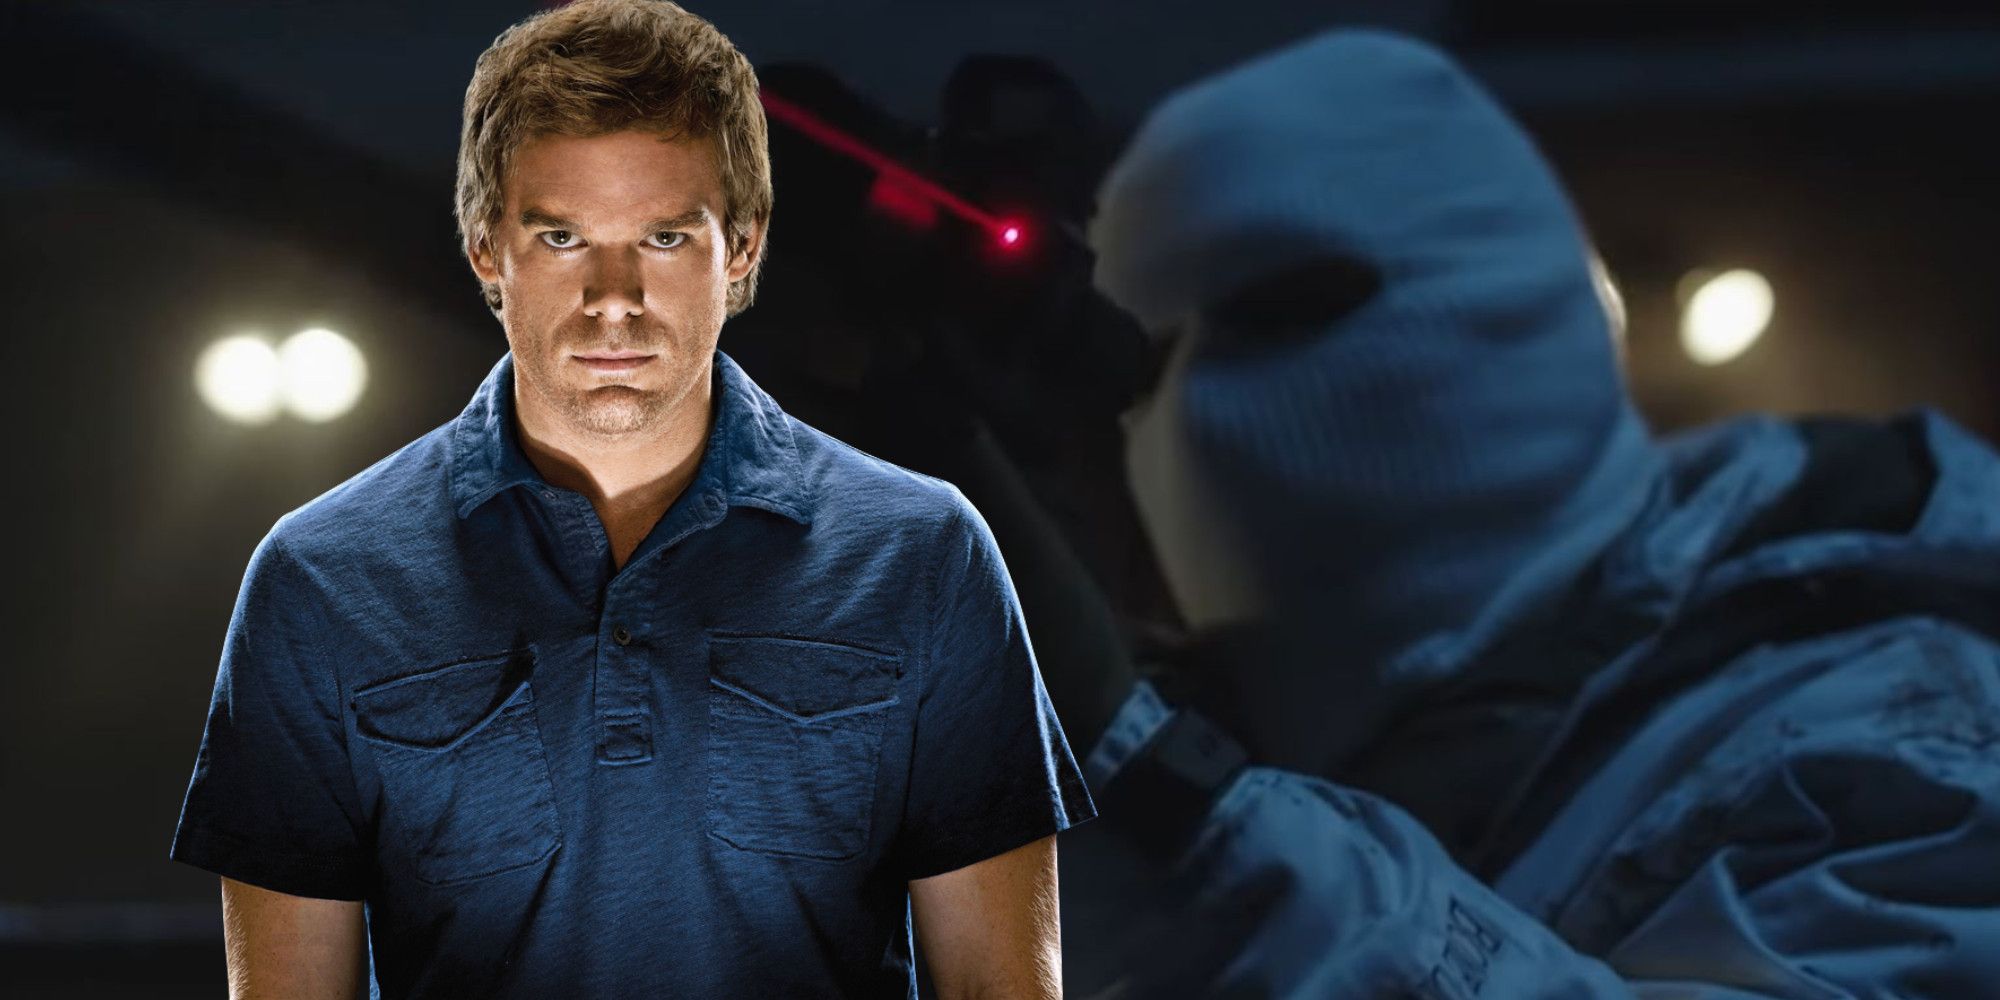 Michael C Hall as Dexter Morgan and Masked Killer in Dexter New Blood